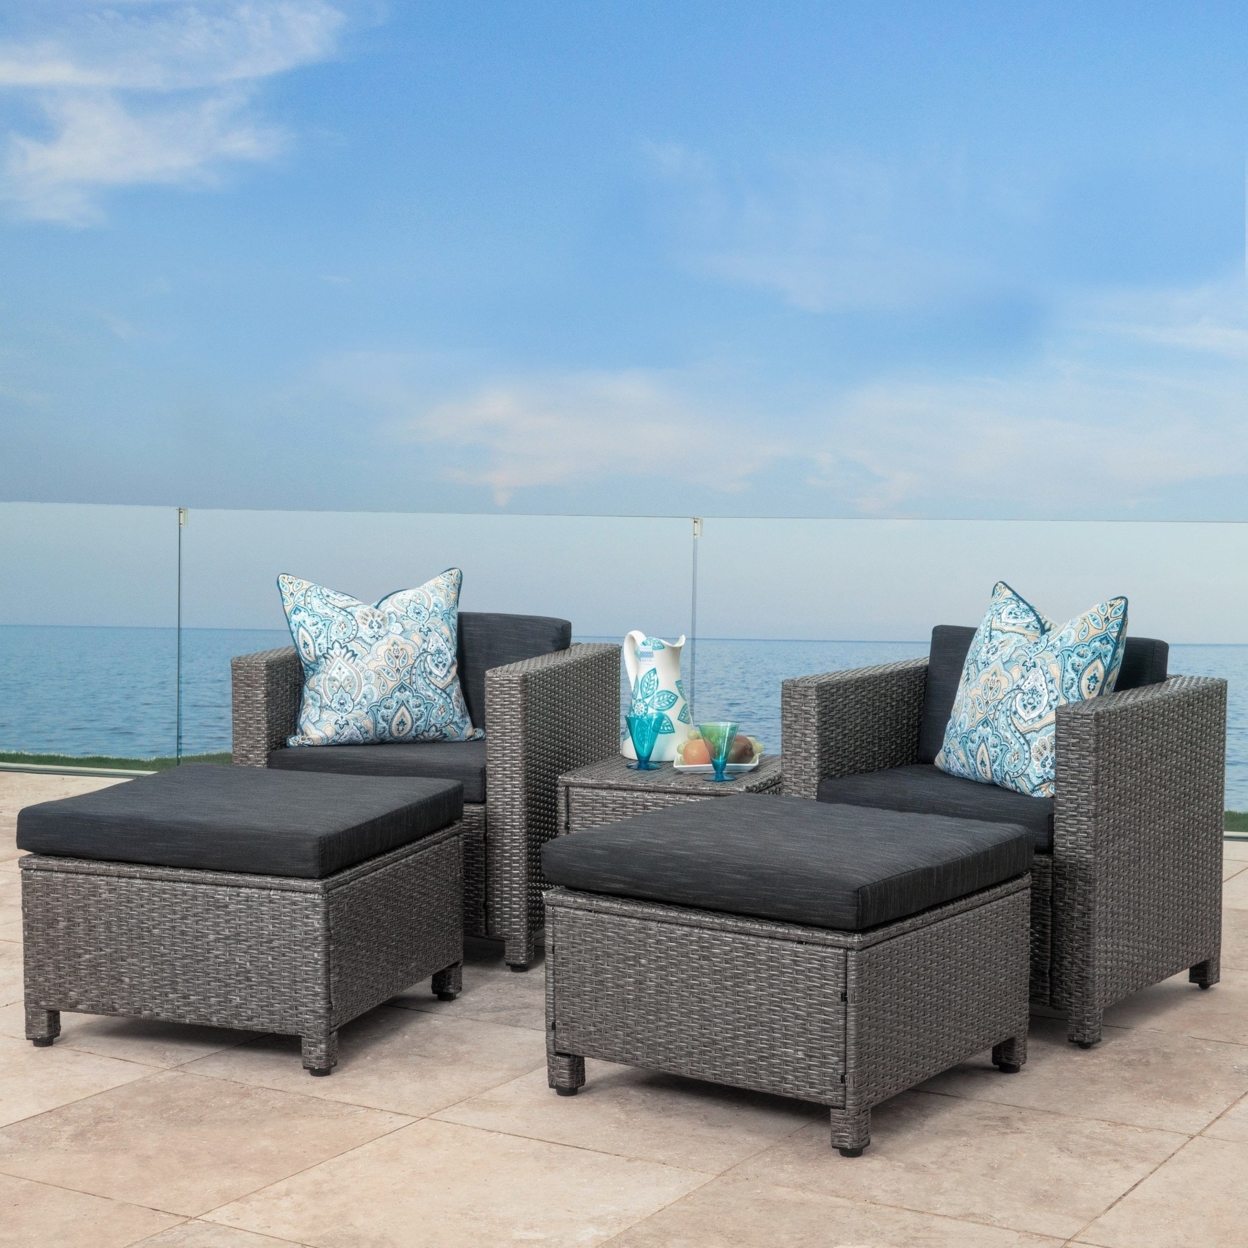 Phillips Outdoor 13 Pc Wicker Patio Set WithWater Resistant Cushions